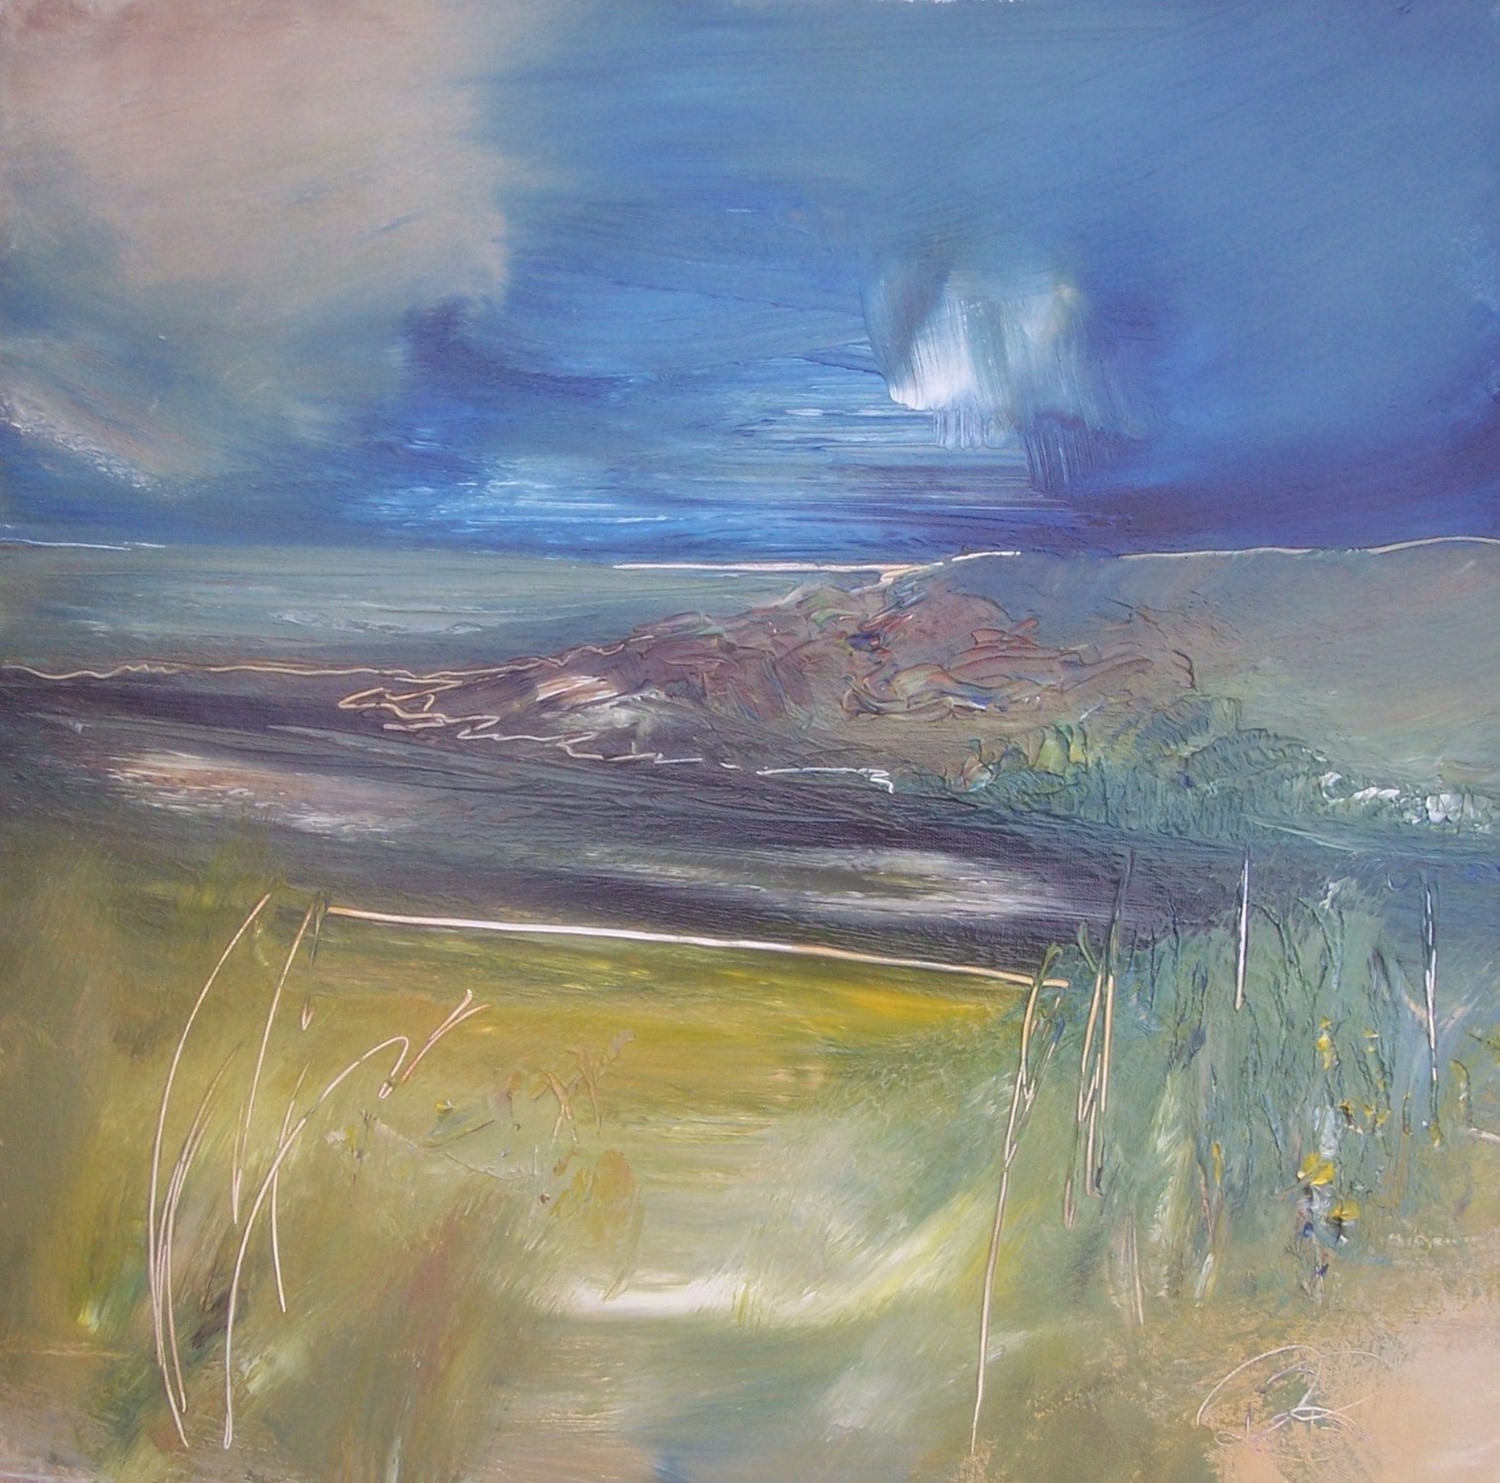 'After a drench' by artist Rosanne Barr